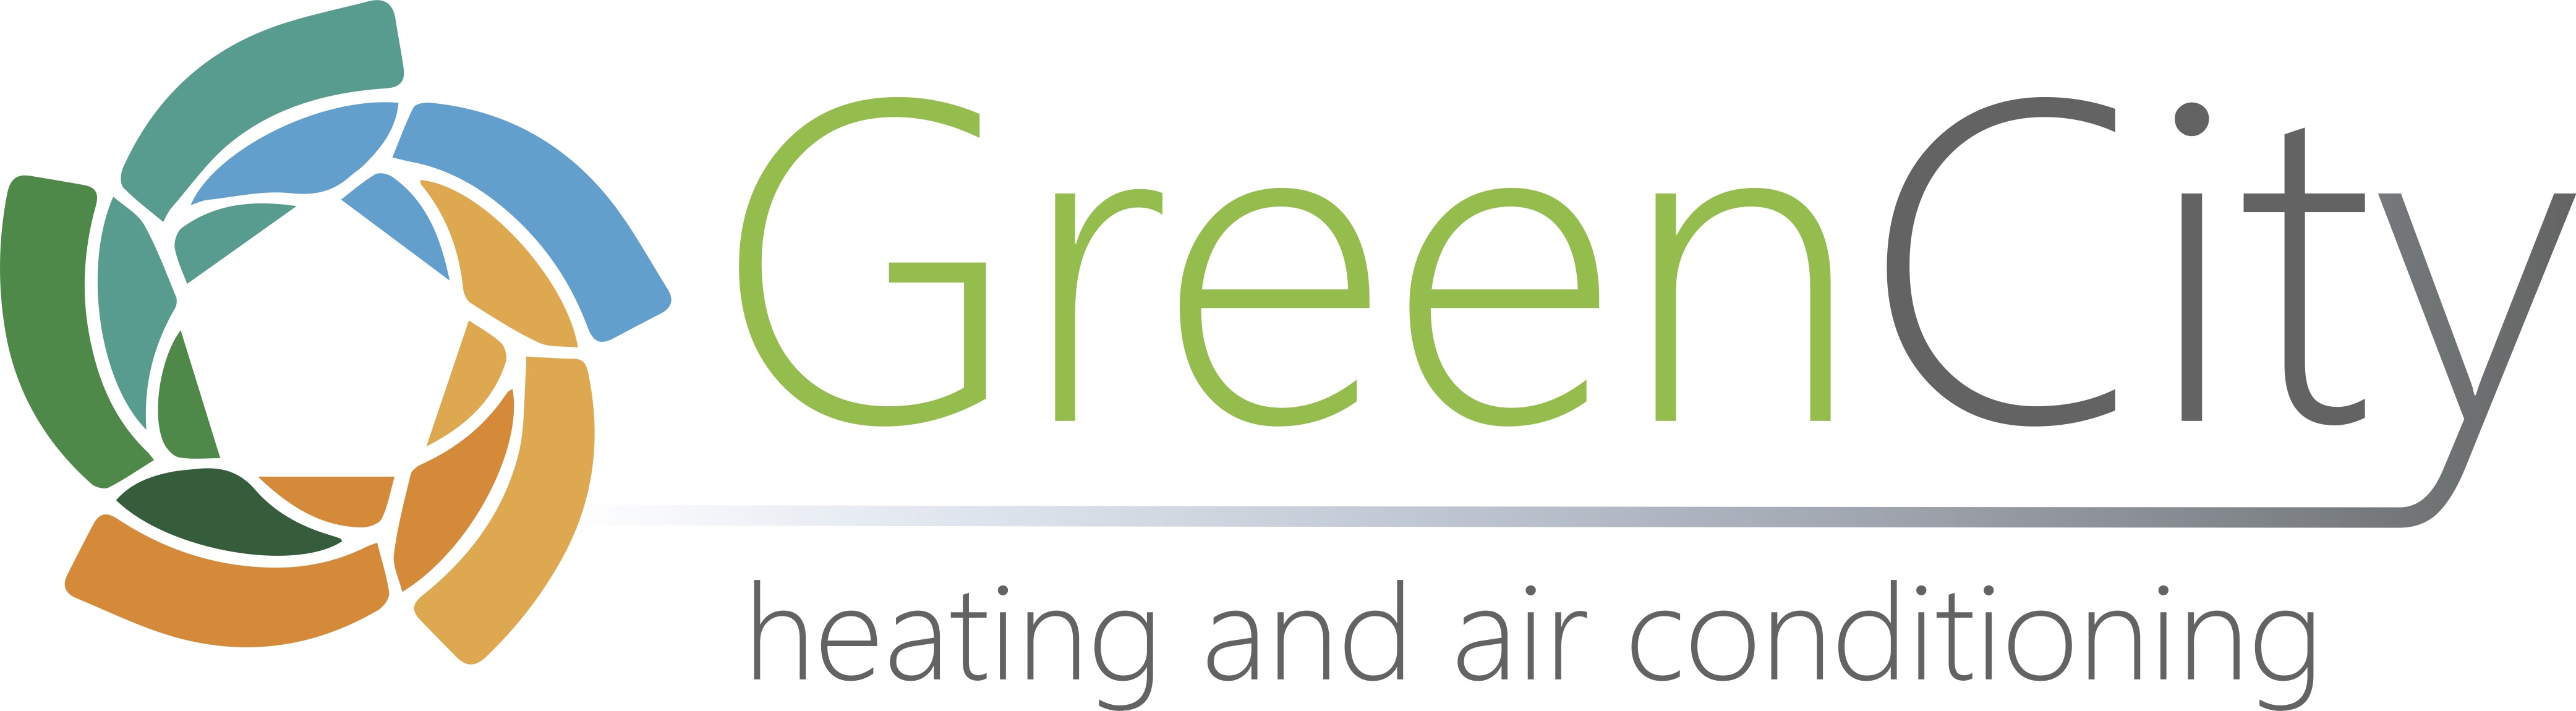 Green City Heating and Air Conditioning, Inc. Logo